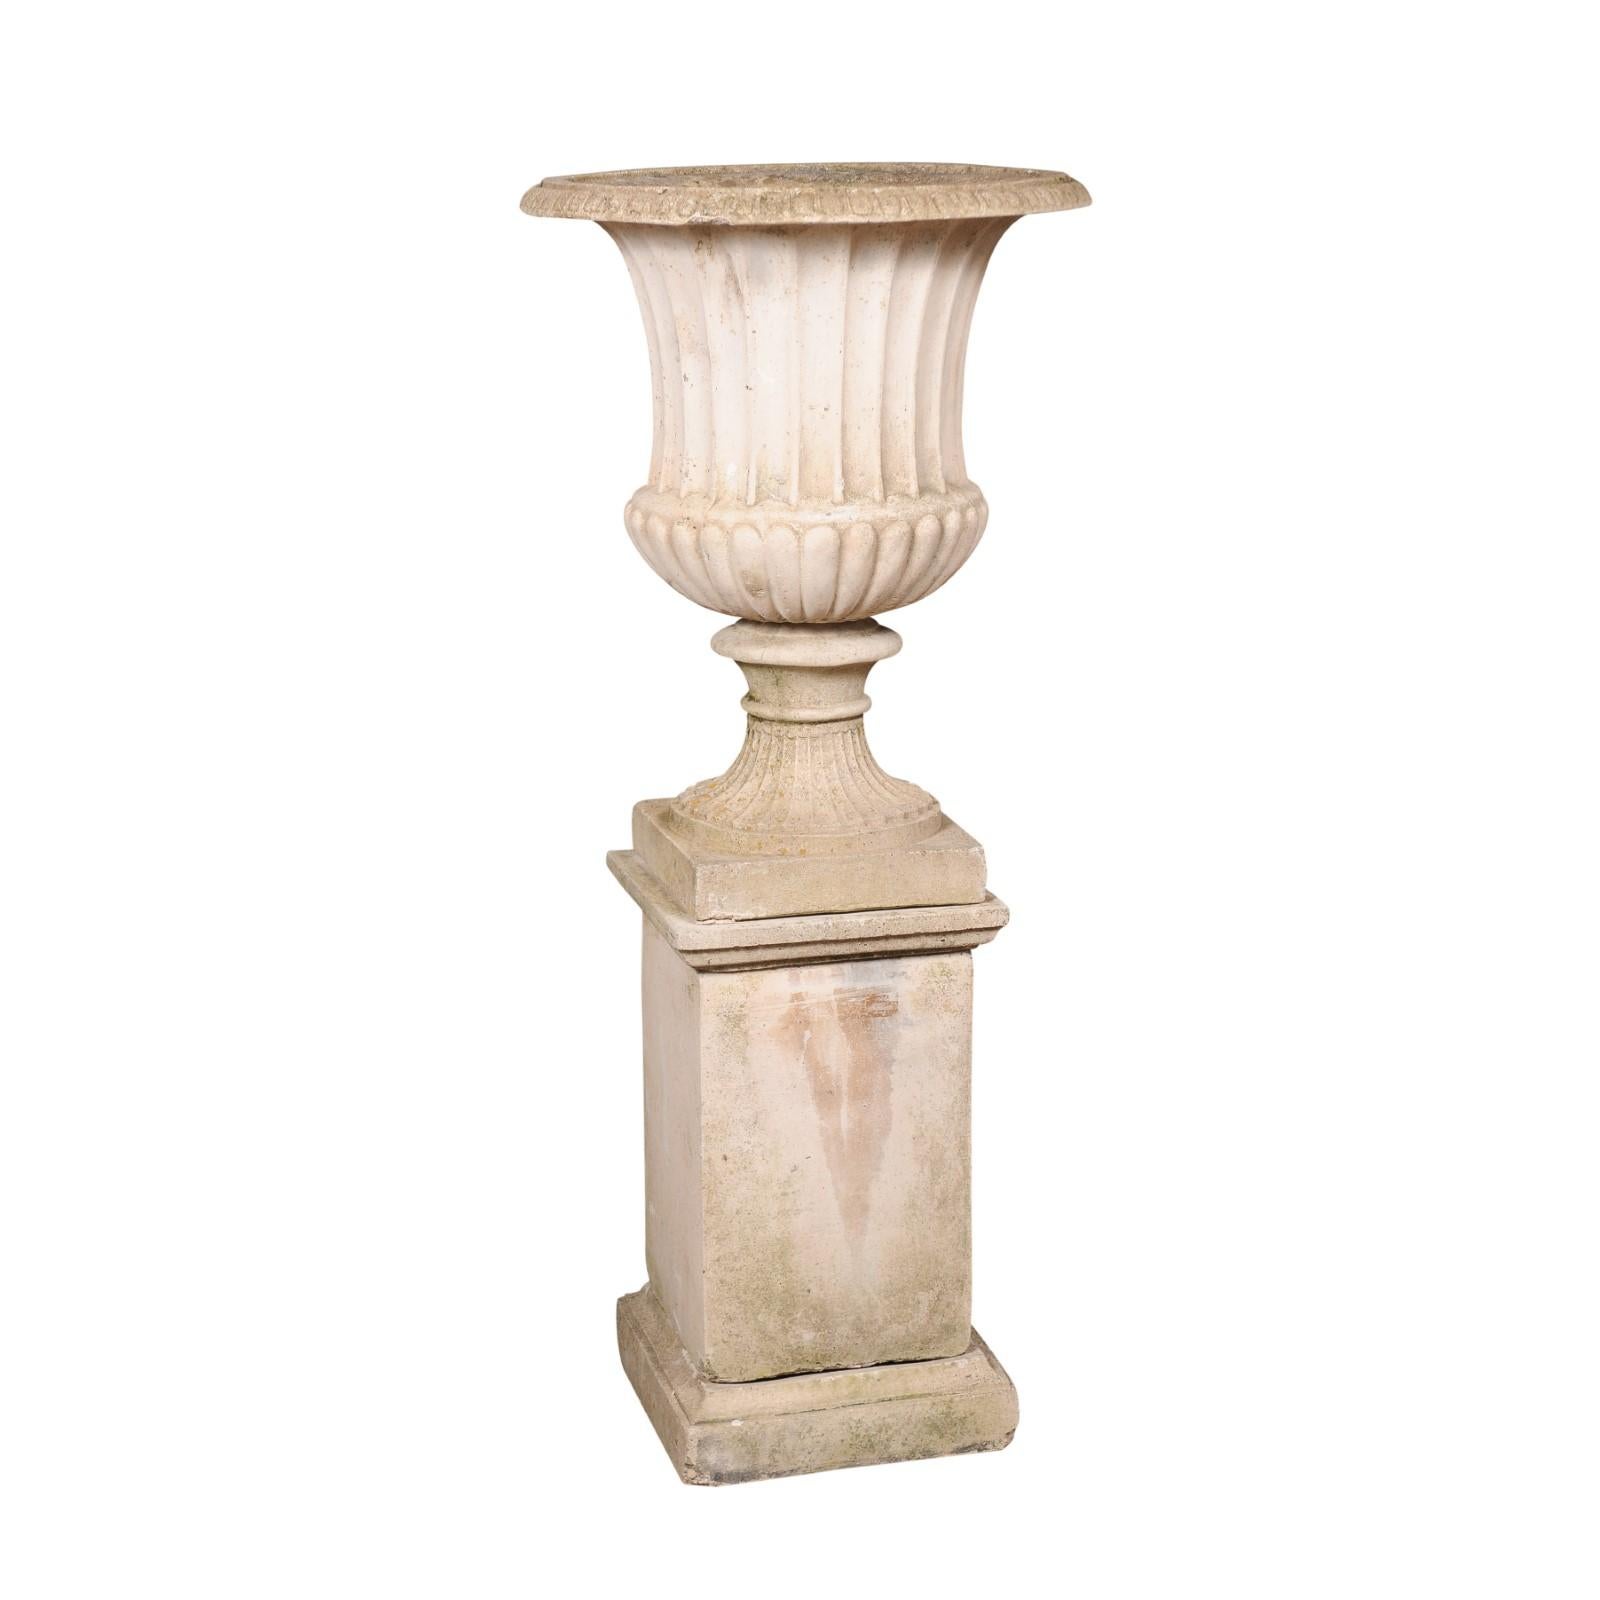 An Italian Turn of the Century Campania urn from the early 20th century, with gadroon motifs, flaring shape and tall pedestal. Made of reconstituted stone in the early years of the 20th century, this Italian Campania urn captures our attention with